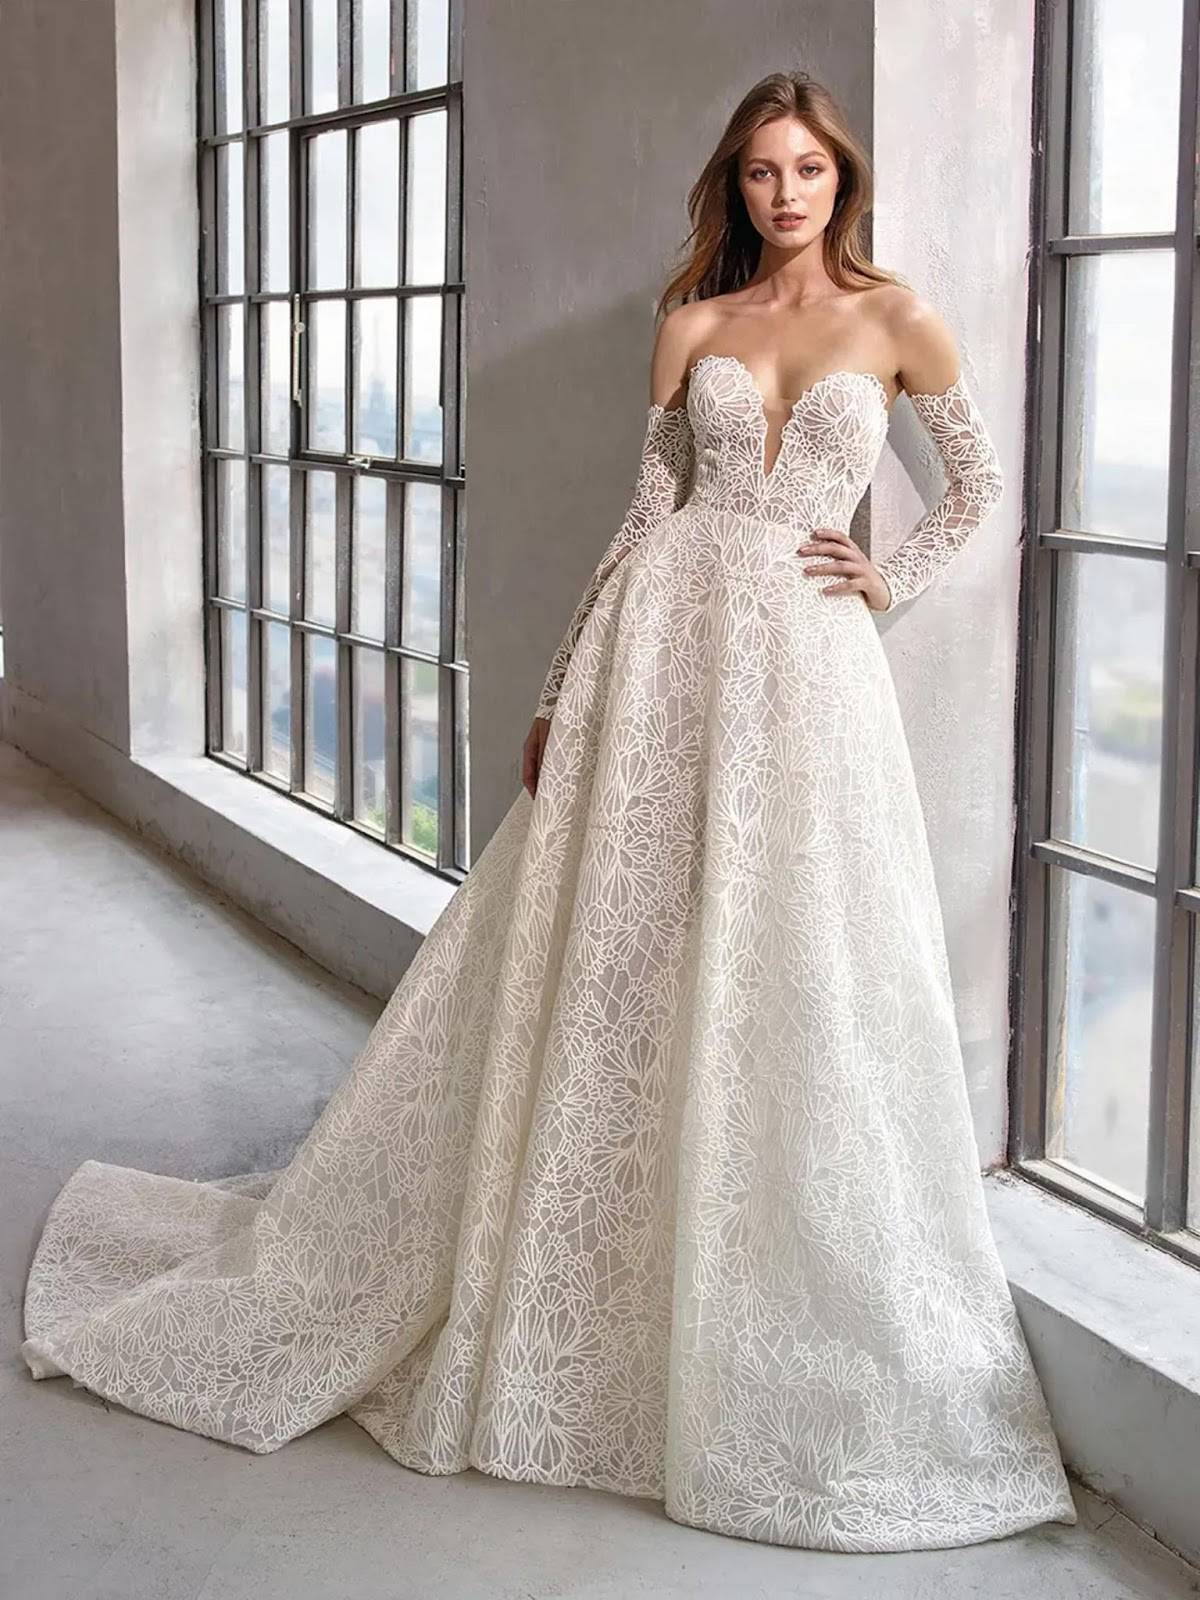 Love Is In The Air: Perfectly Romantic Wedding Dresses Image